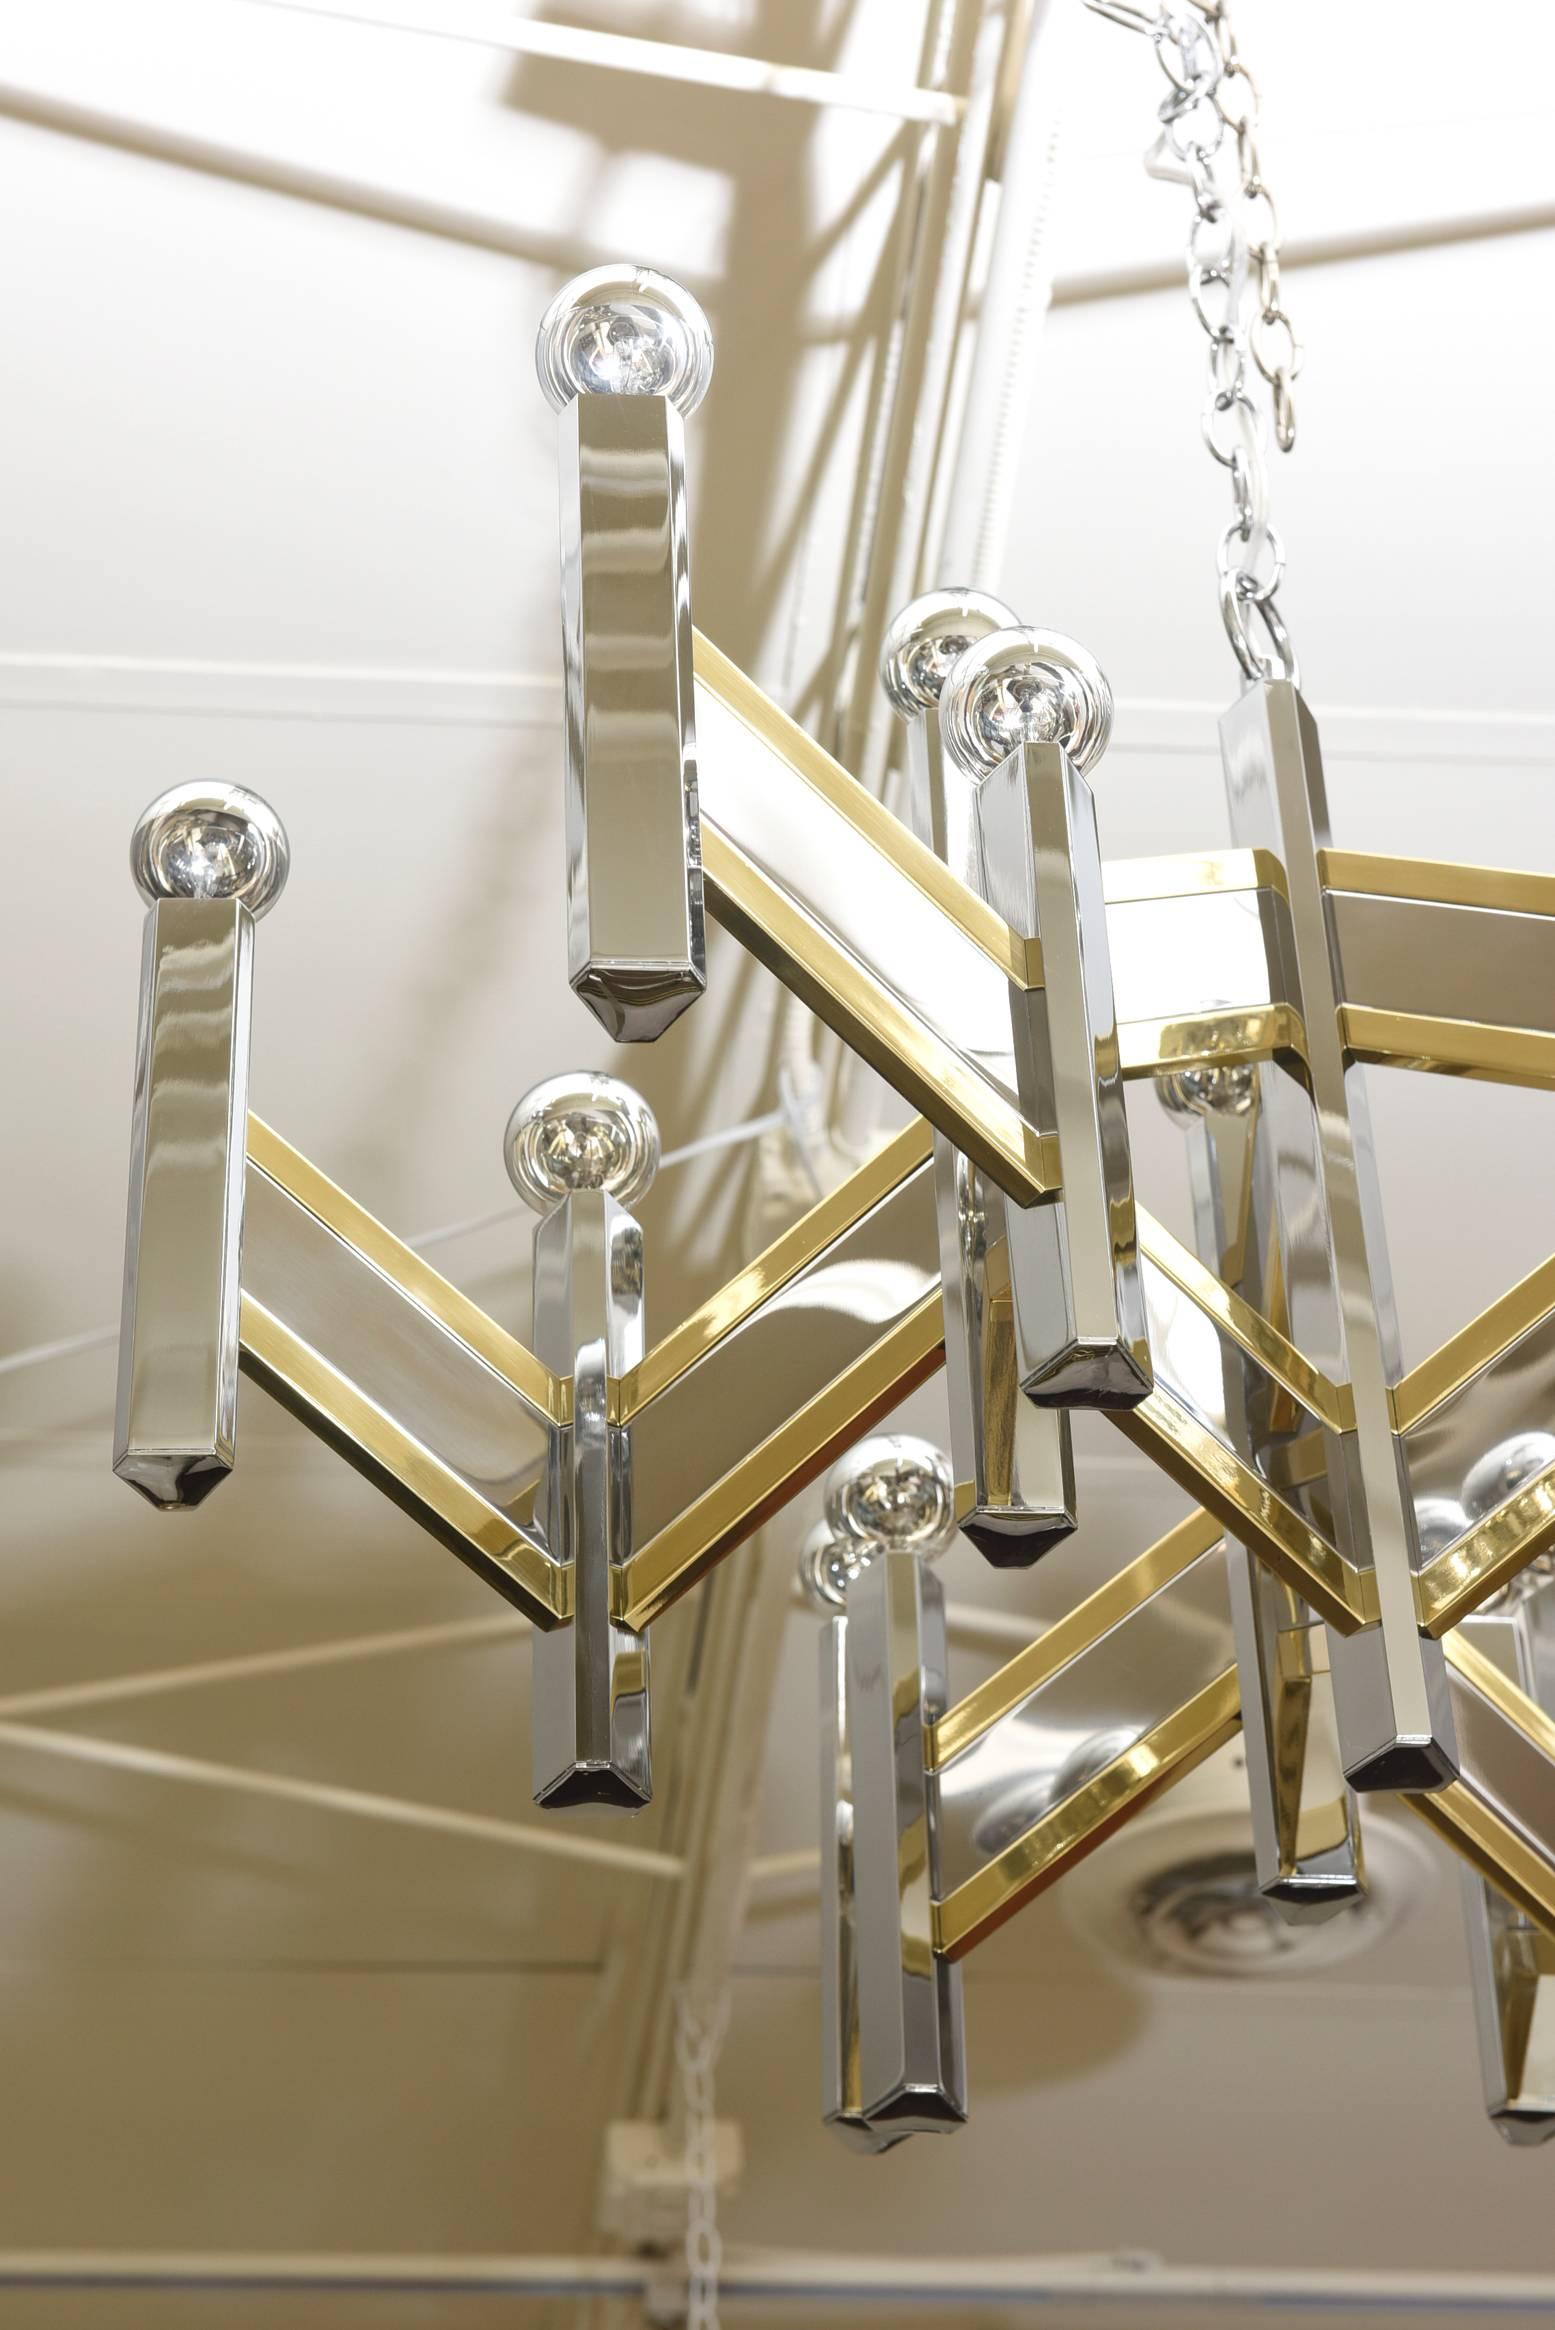 This mixed metals of brass and nickel silver of this vintage Italian Gaetano Sciolari for Lightolier chandelier has been professionally polished and rewired. The dramatic zig zag chevron pattern alternating nickel silver and brass houses 15-light